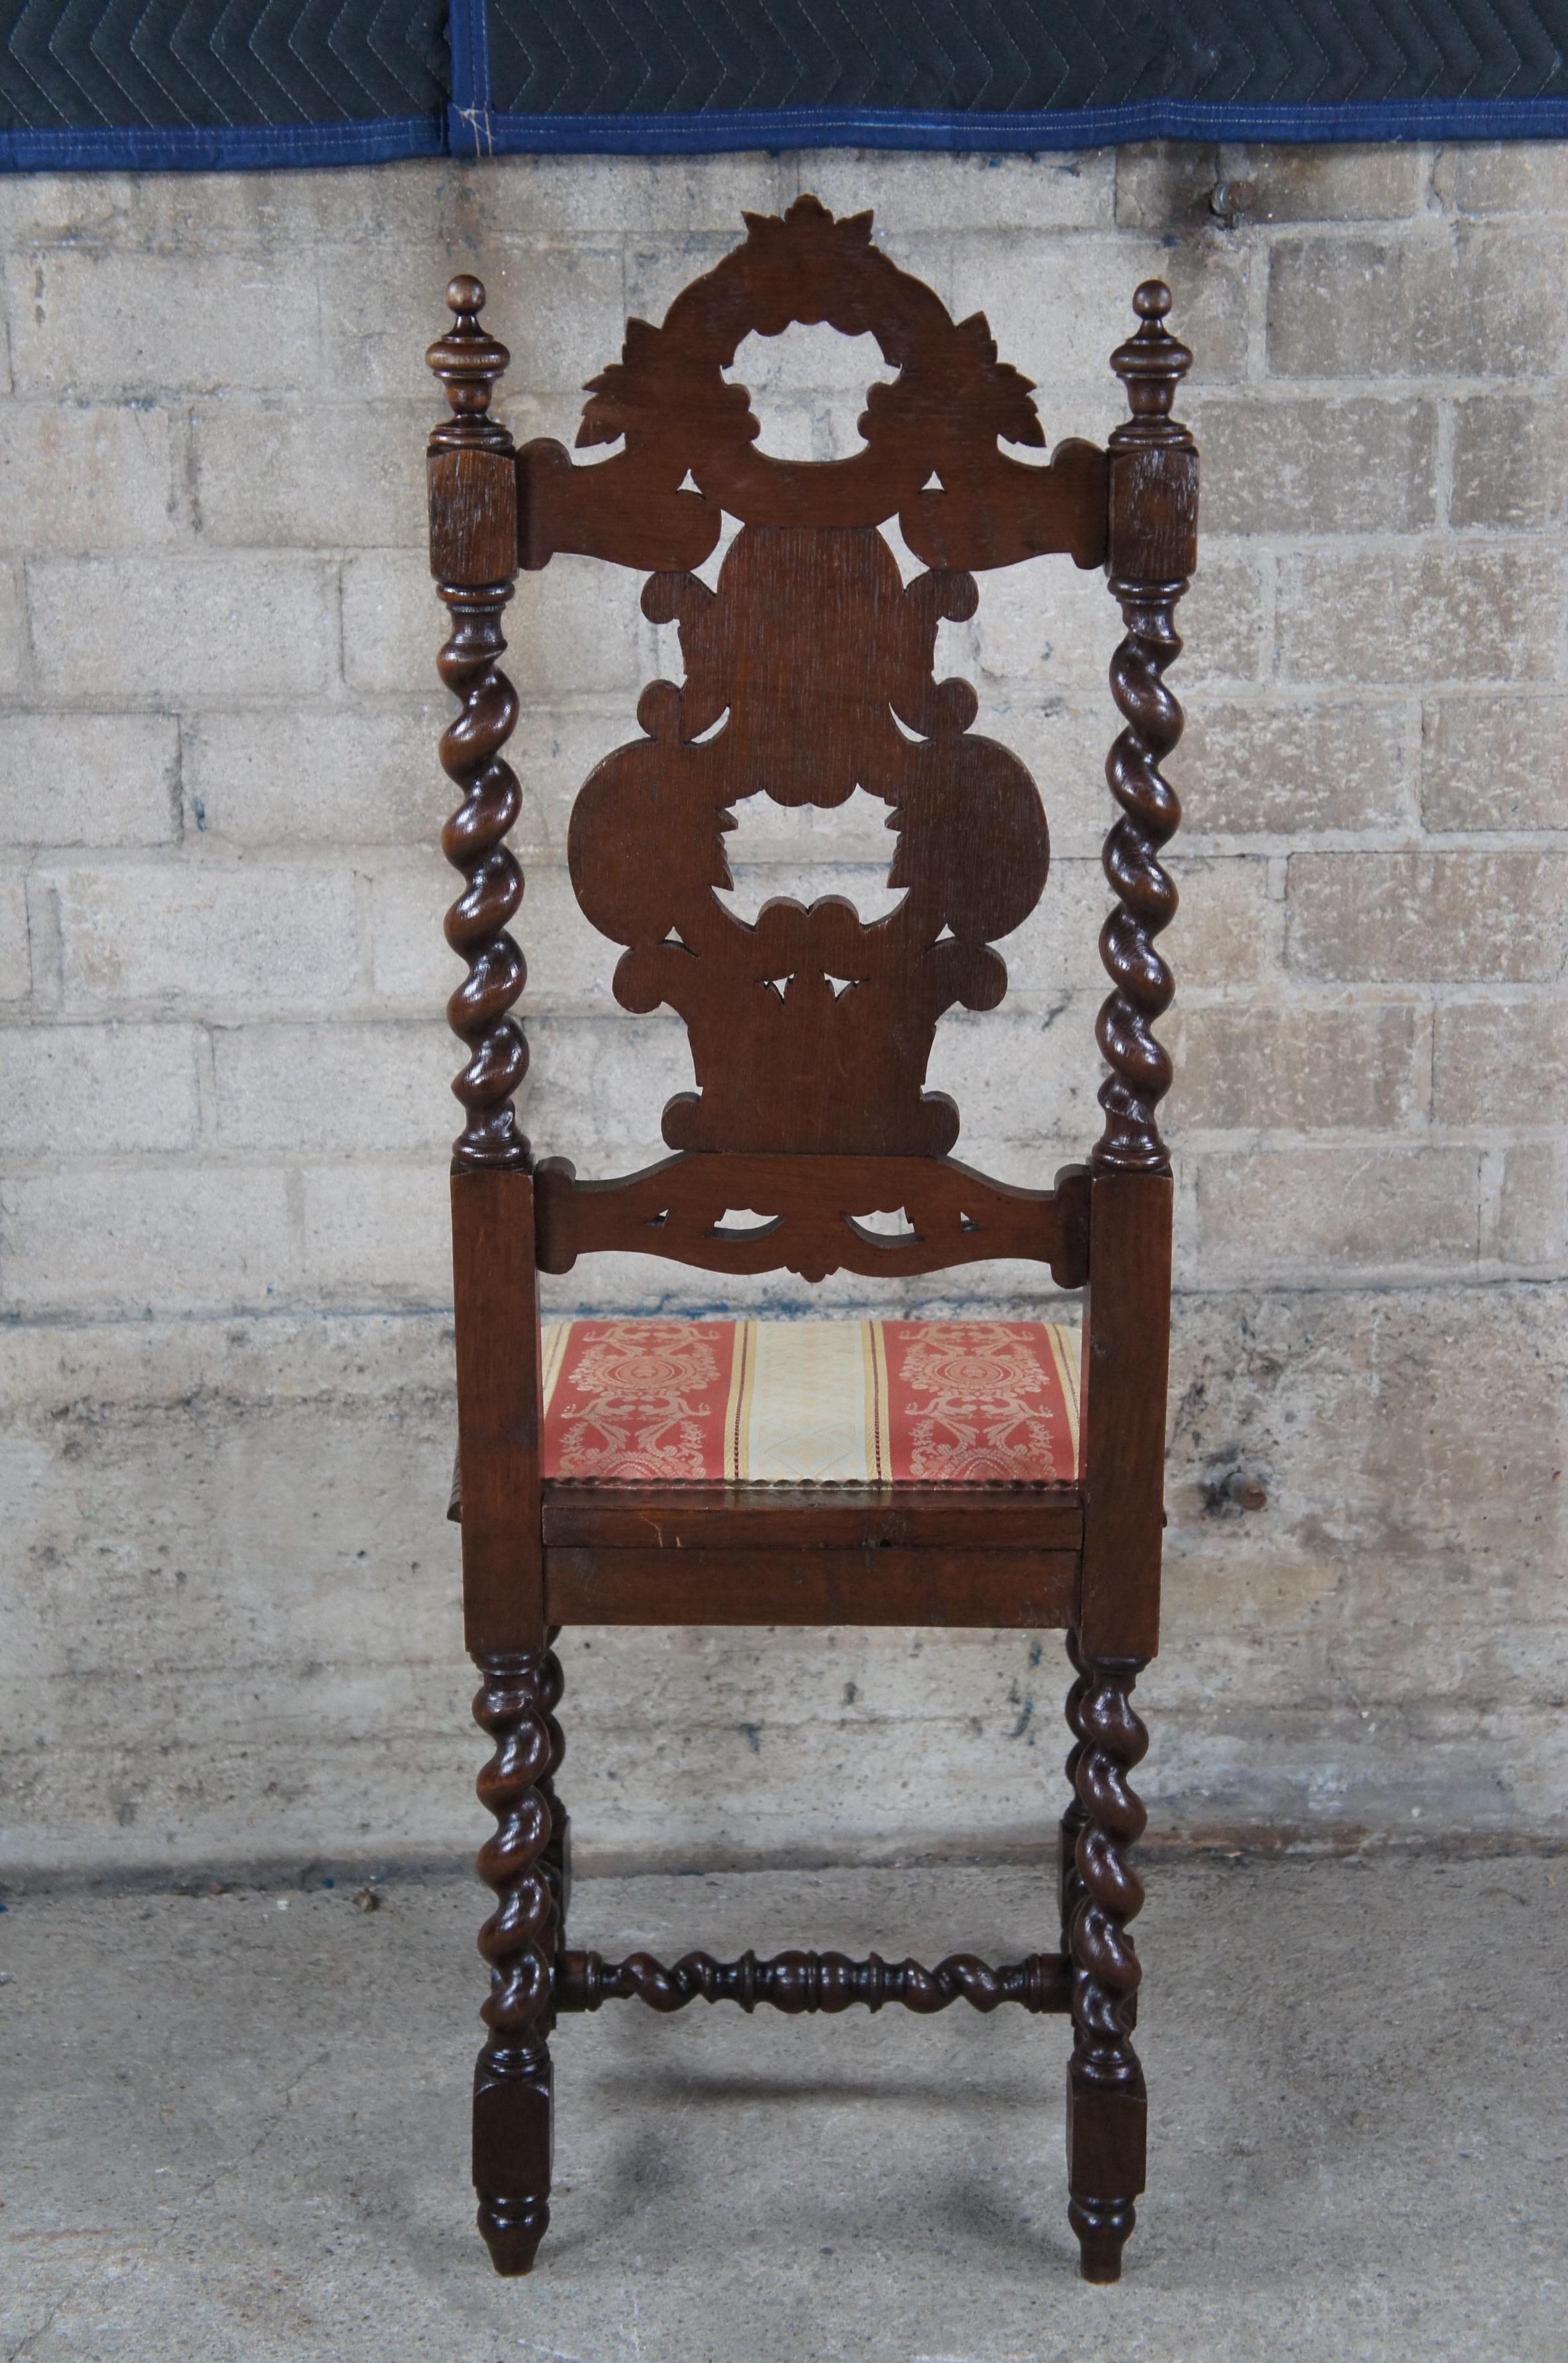 Early 20th Century 6 Antique Gothic French Renaissance Revival Oak Barley Twisted Dining Chairs For Sale